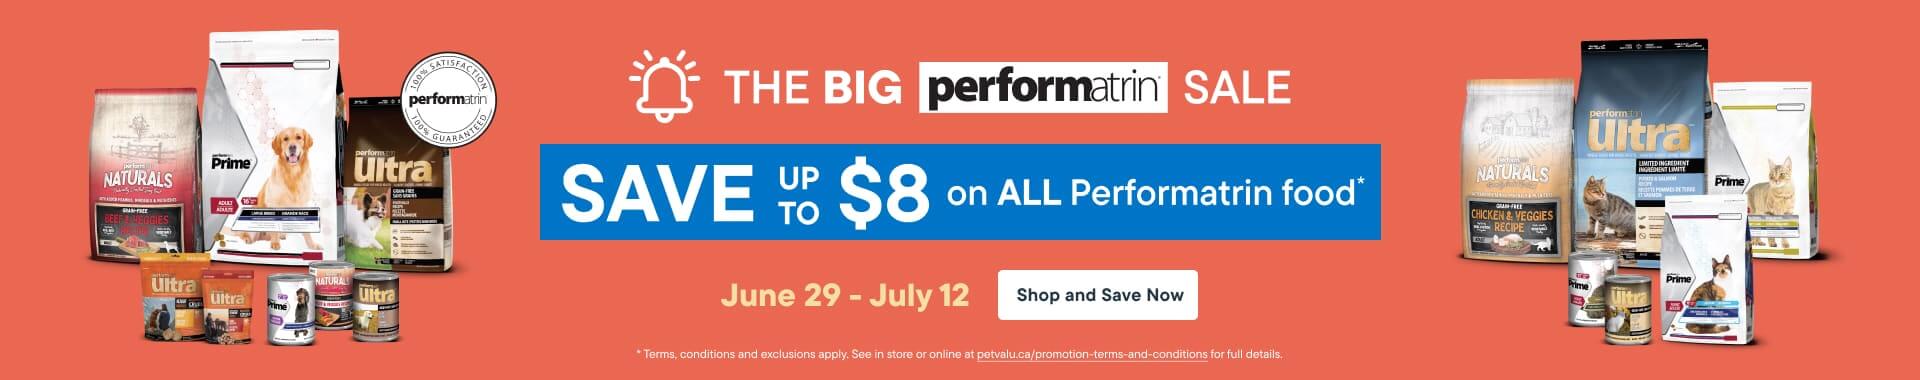 The Big Performatrin Sale. Save up to $8 on all Performatrin food. Offer Ends July 12.